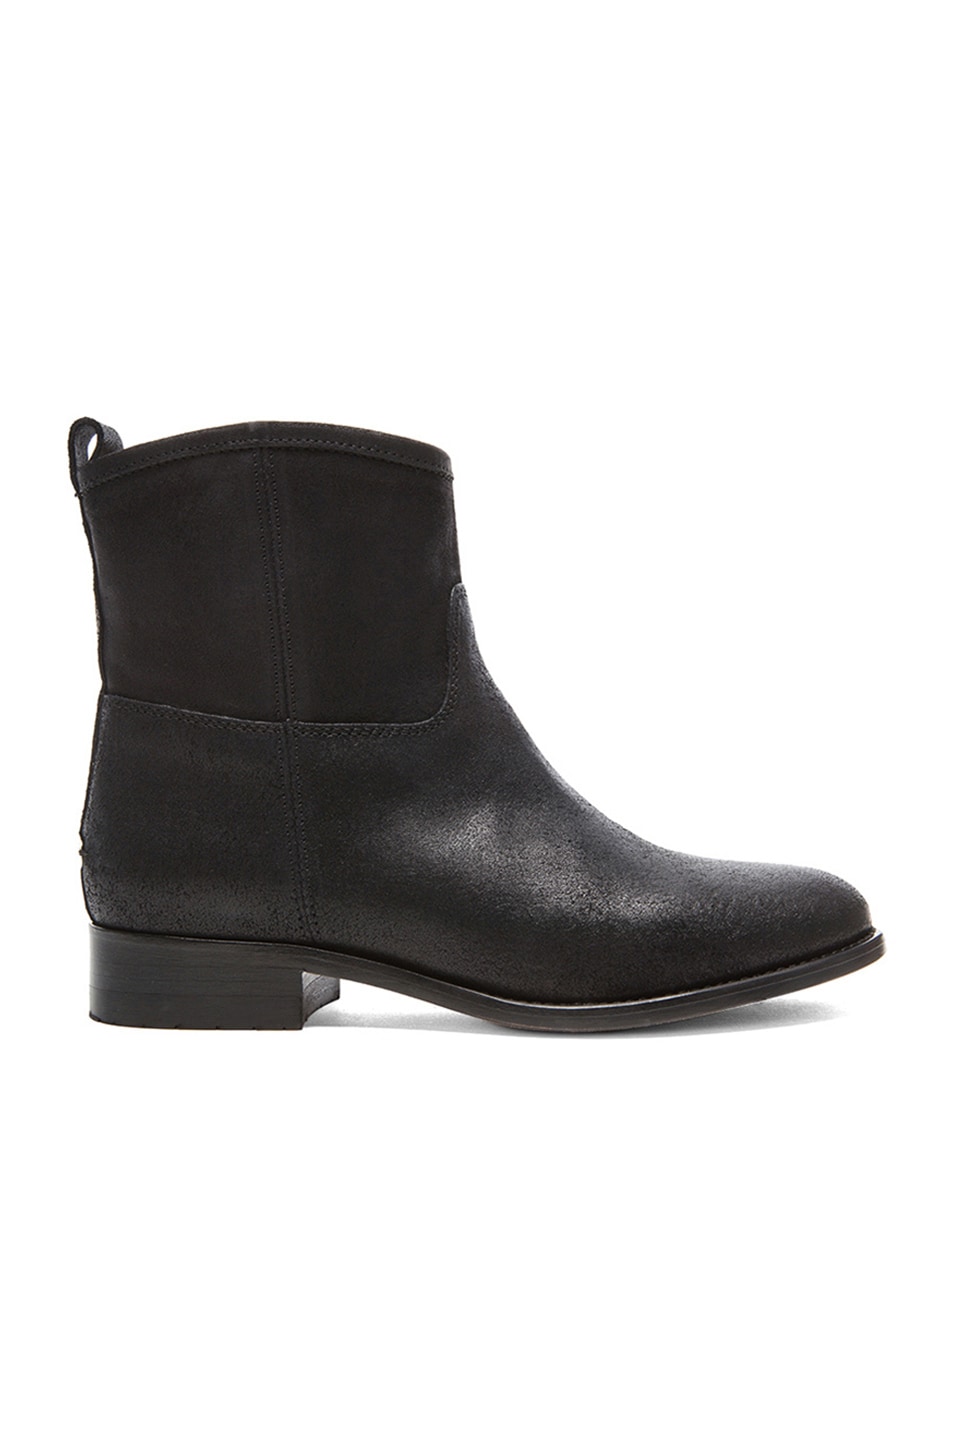 Image 1 of Jimmy Choo Harley Ankle Leather Boots in Black